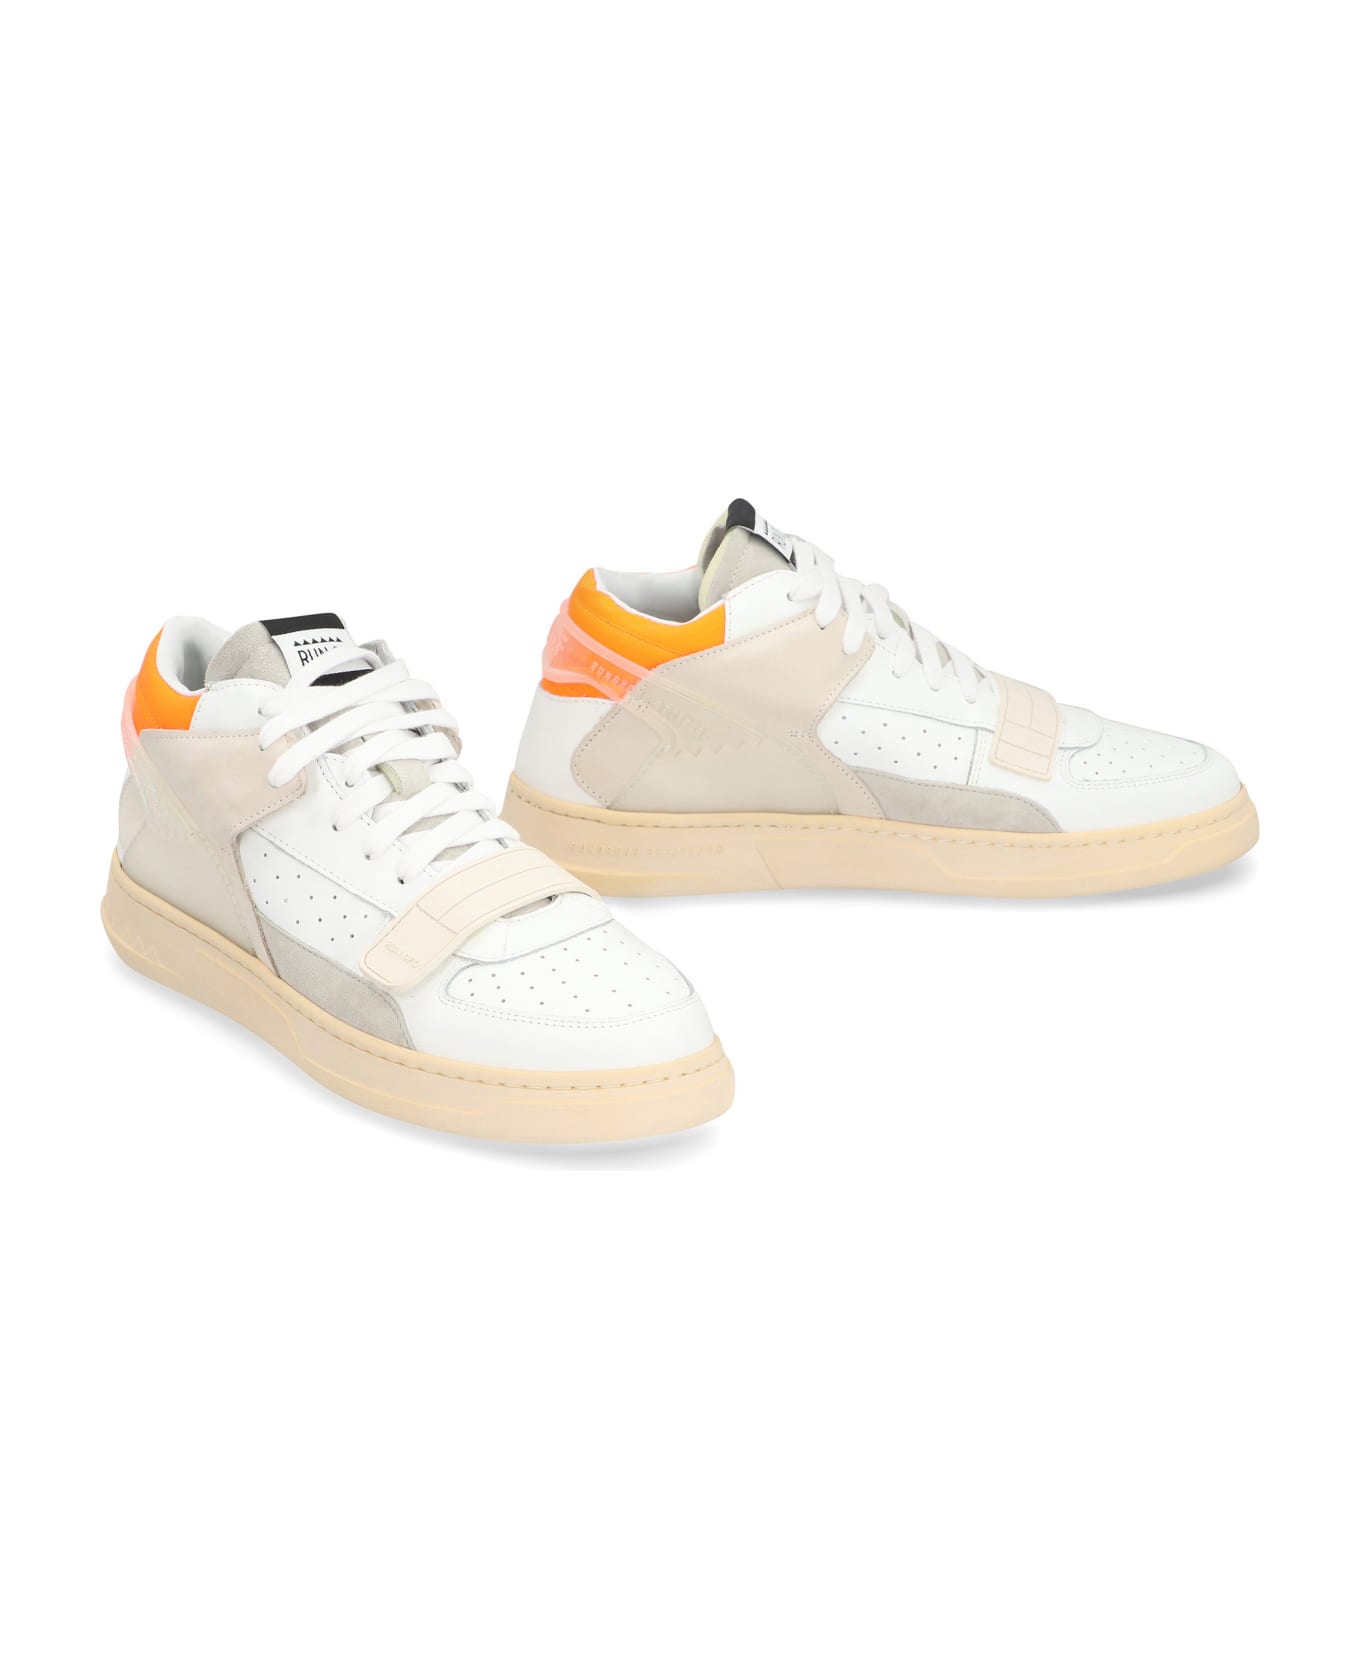 RUN OF Leather Mid-top Sneakers - White